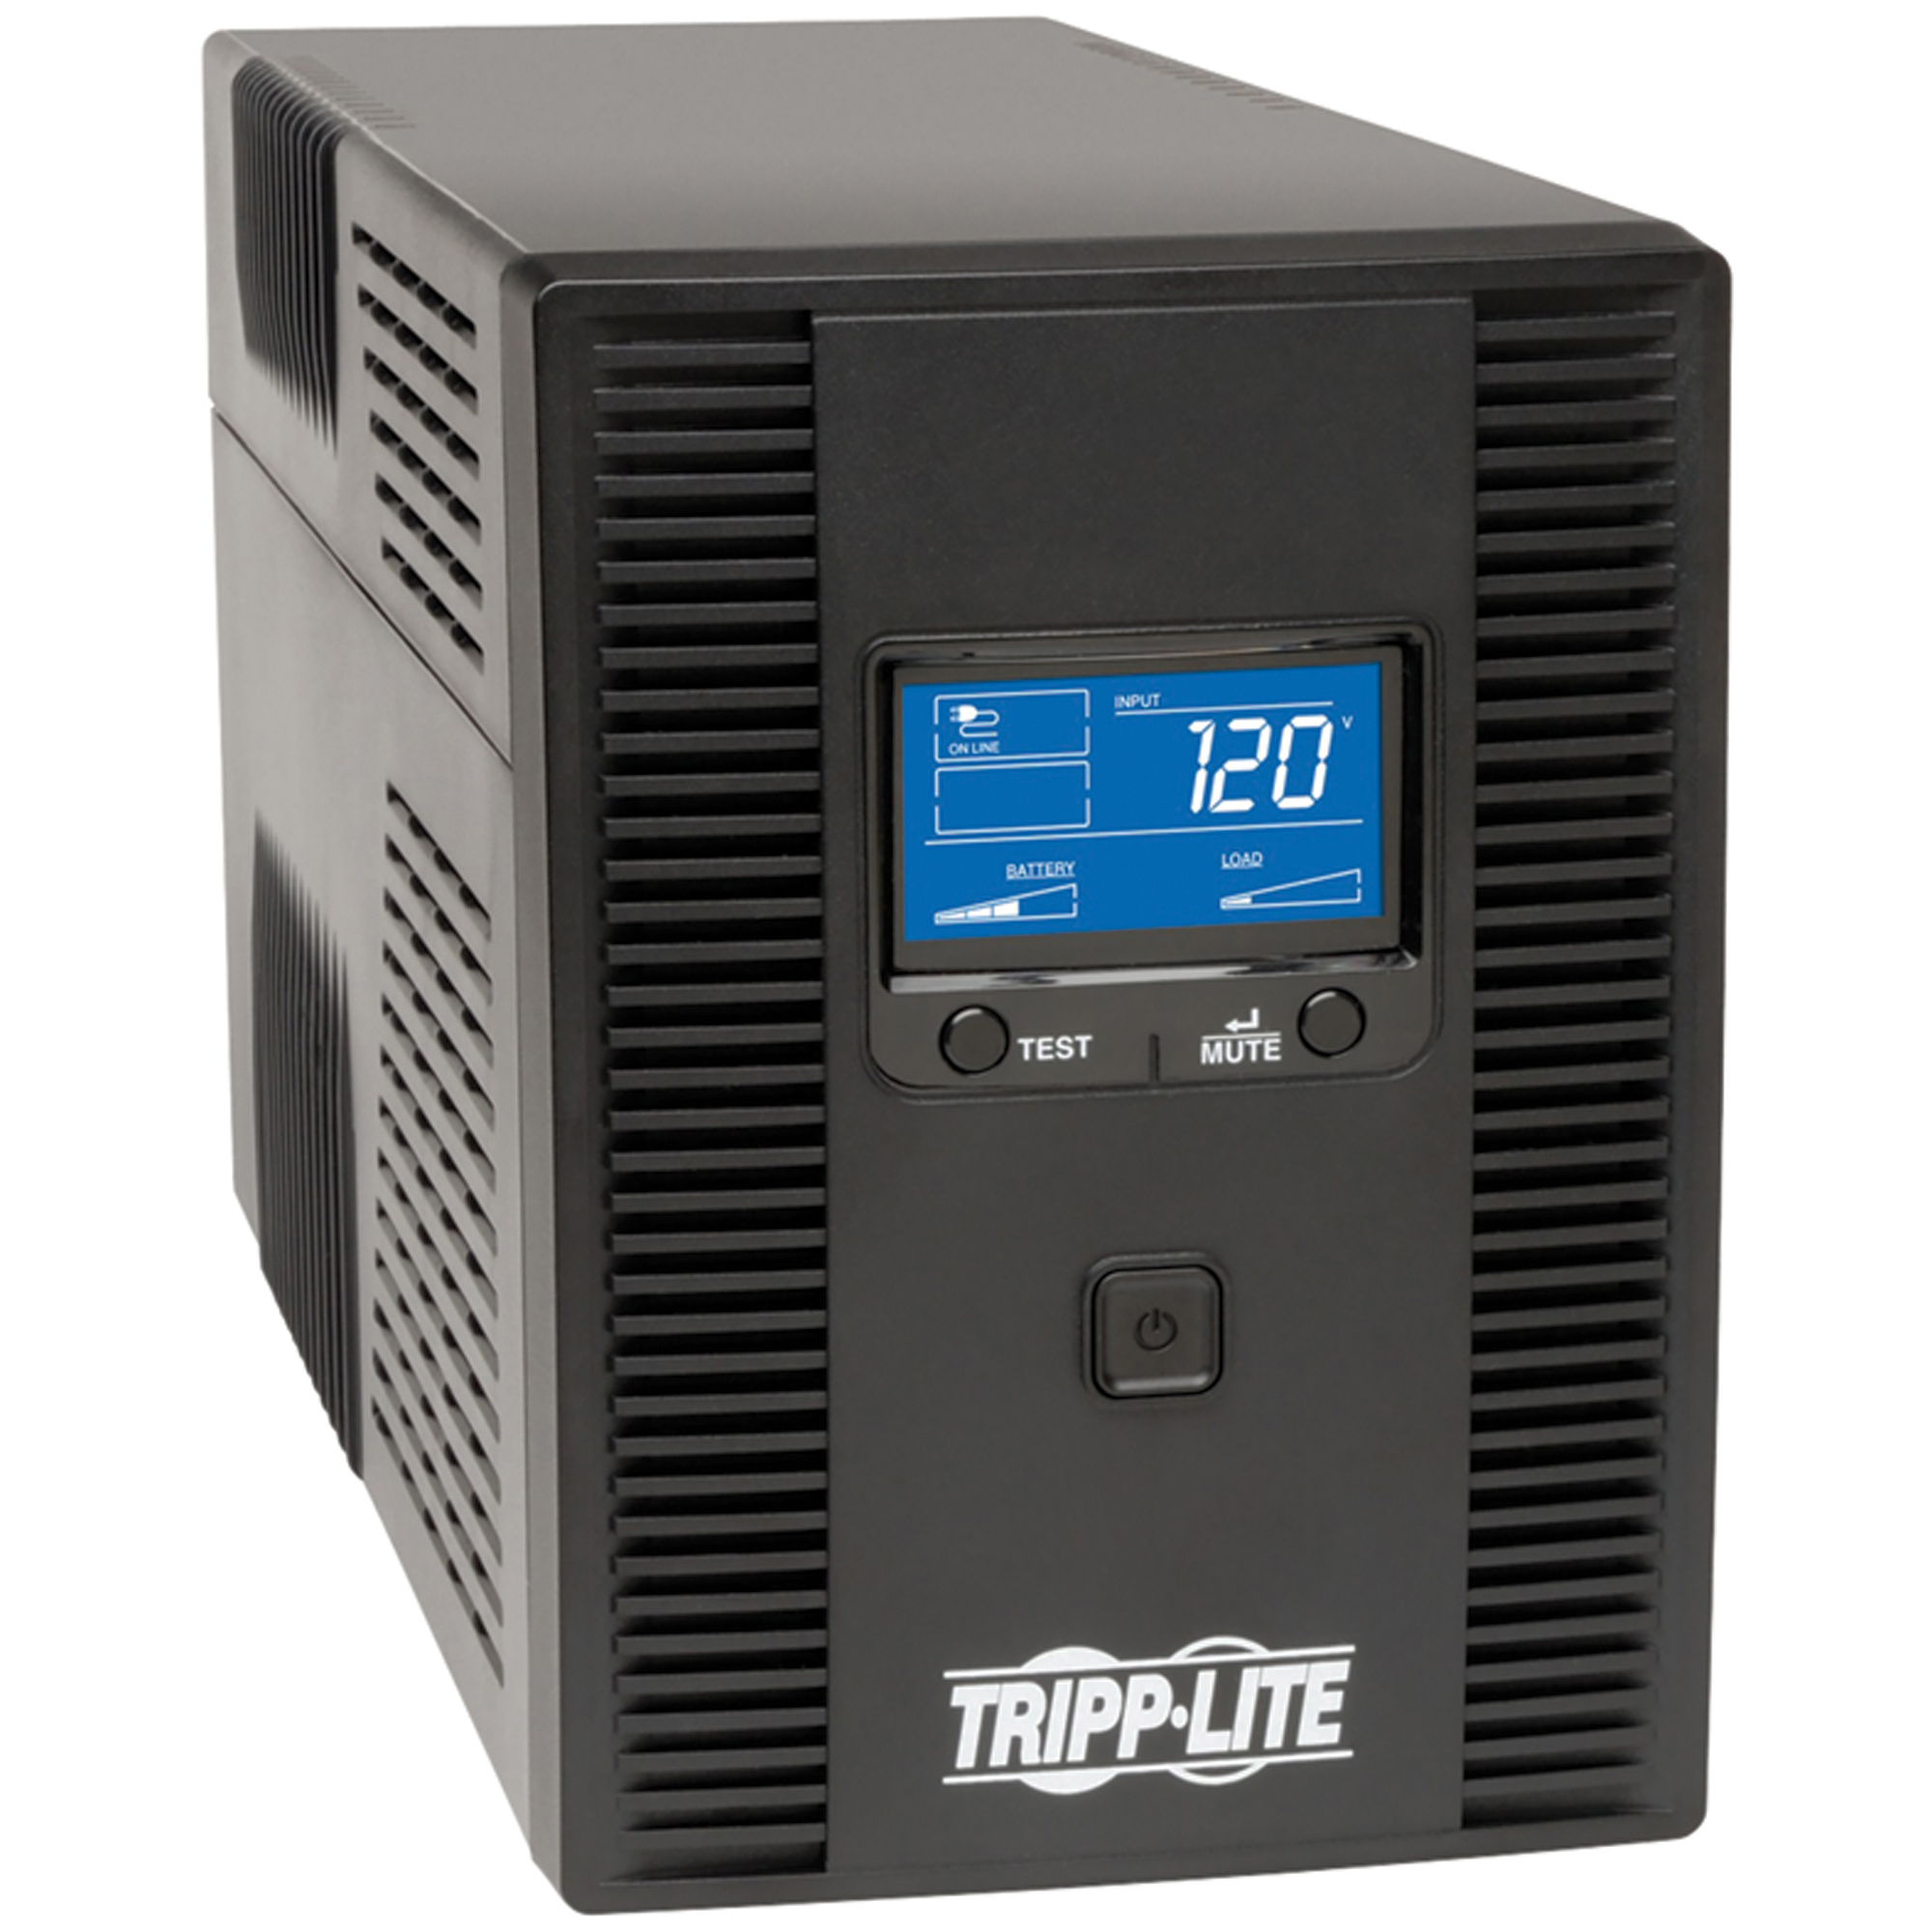 Tripp Lite by Eaton, 1500-VA Line-Interactive Tower UPS System, Model OMNI1500LCDT